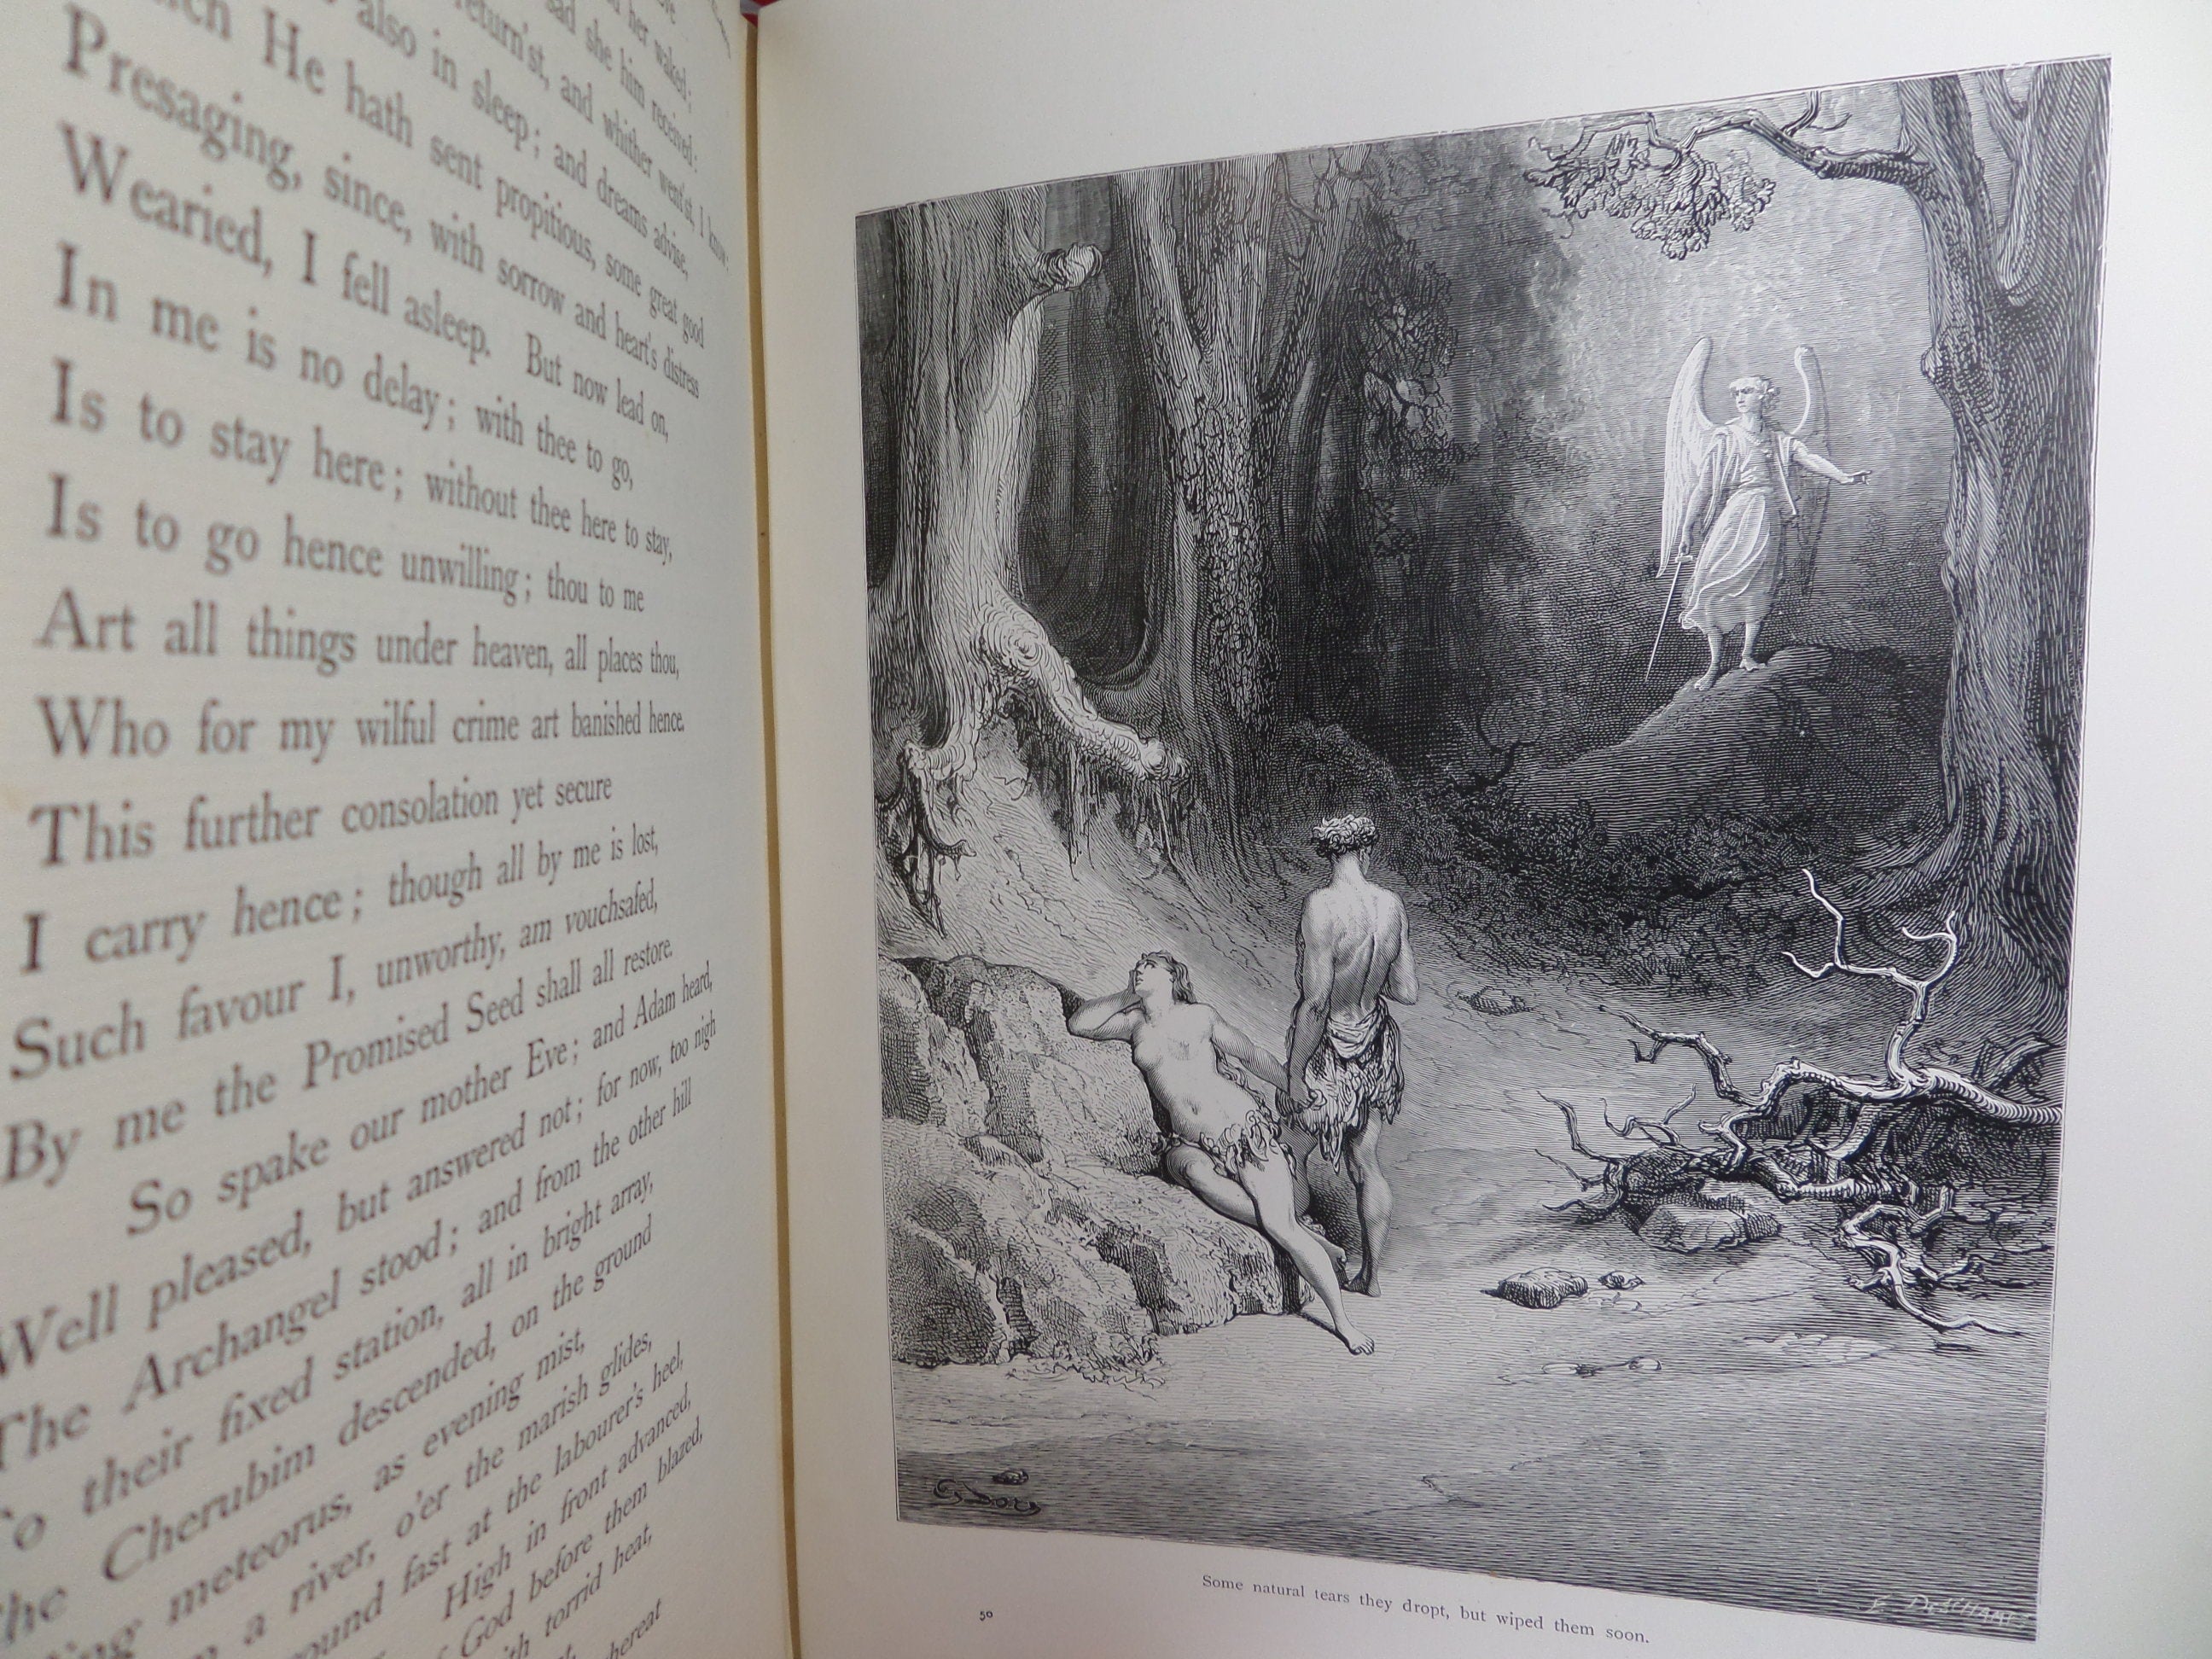 MILTON'S PARADISE LOST 1905 ILLUSTRATED BY GUSTAVE DORE